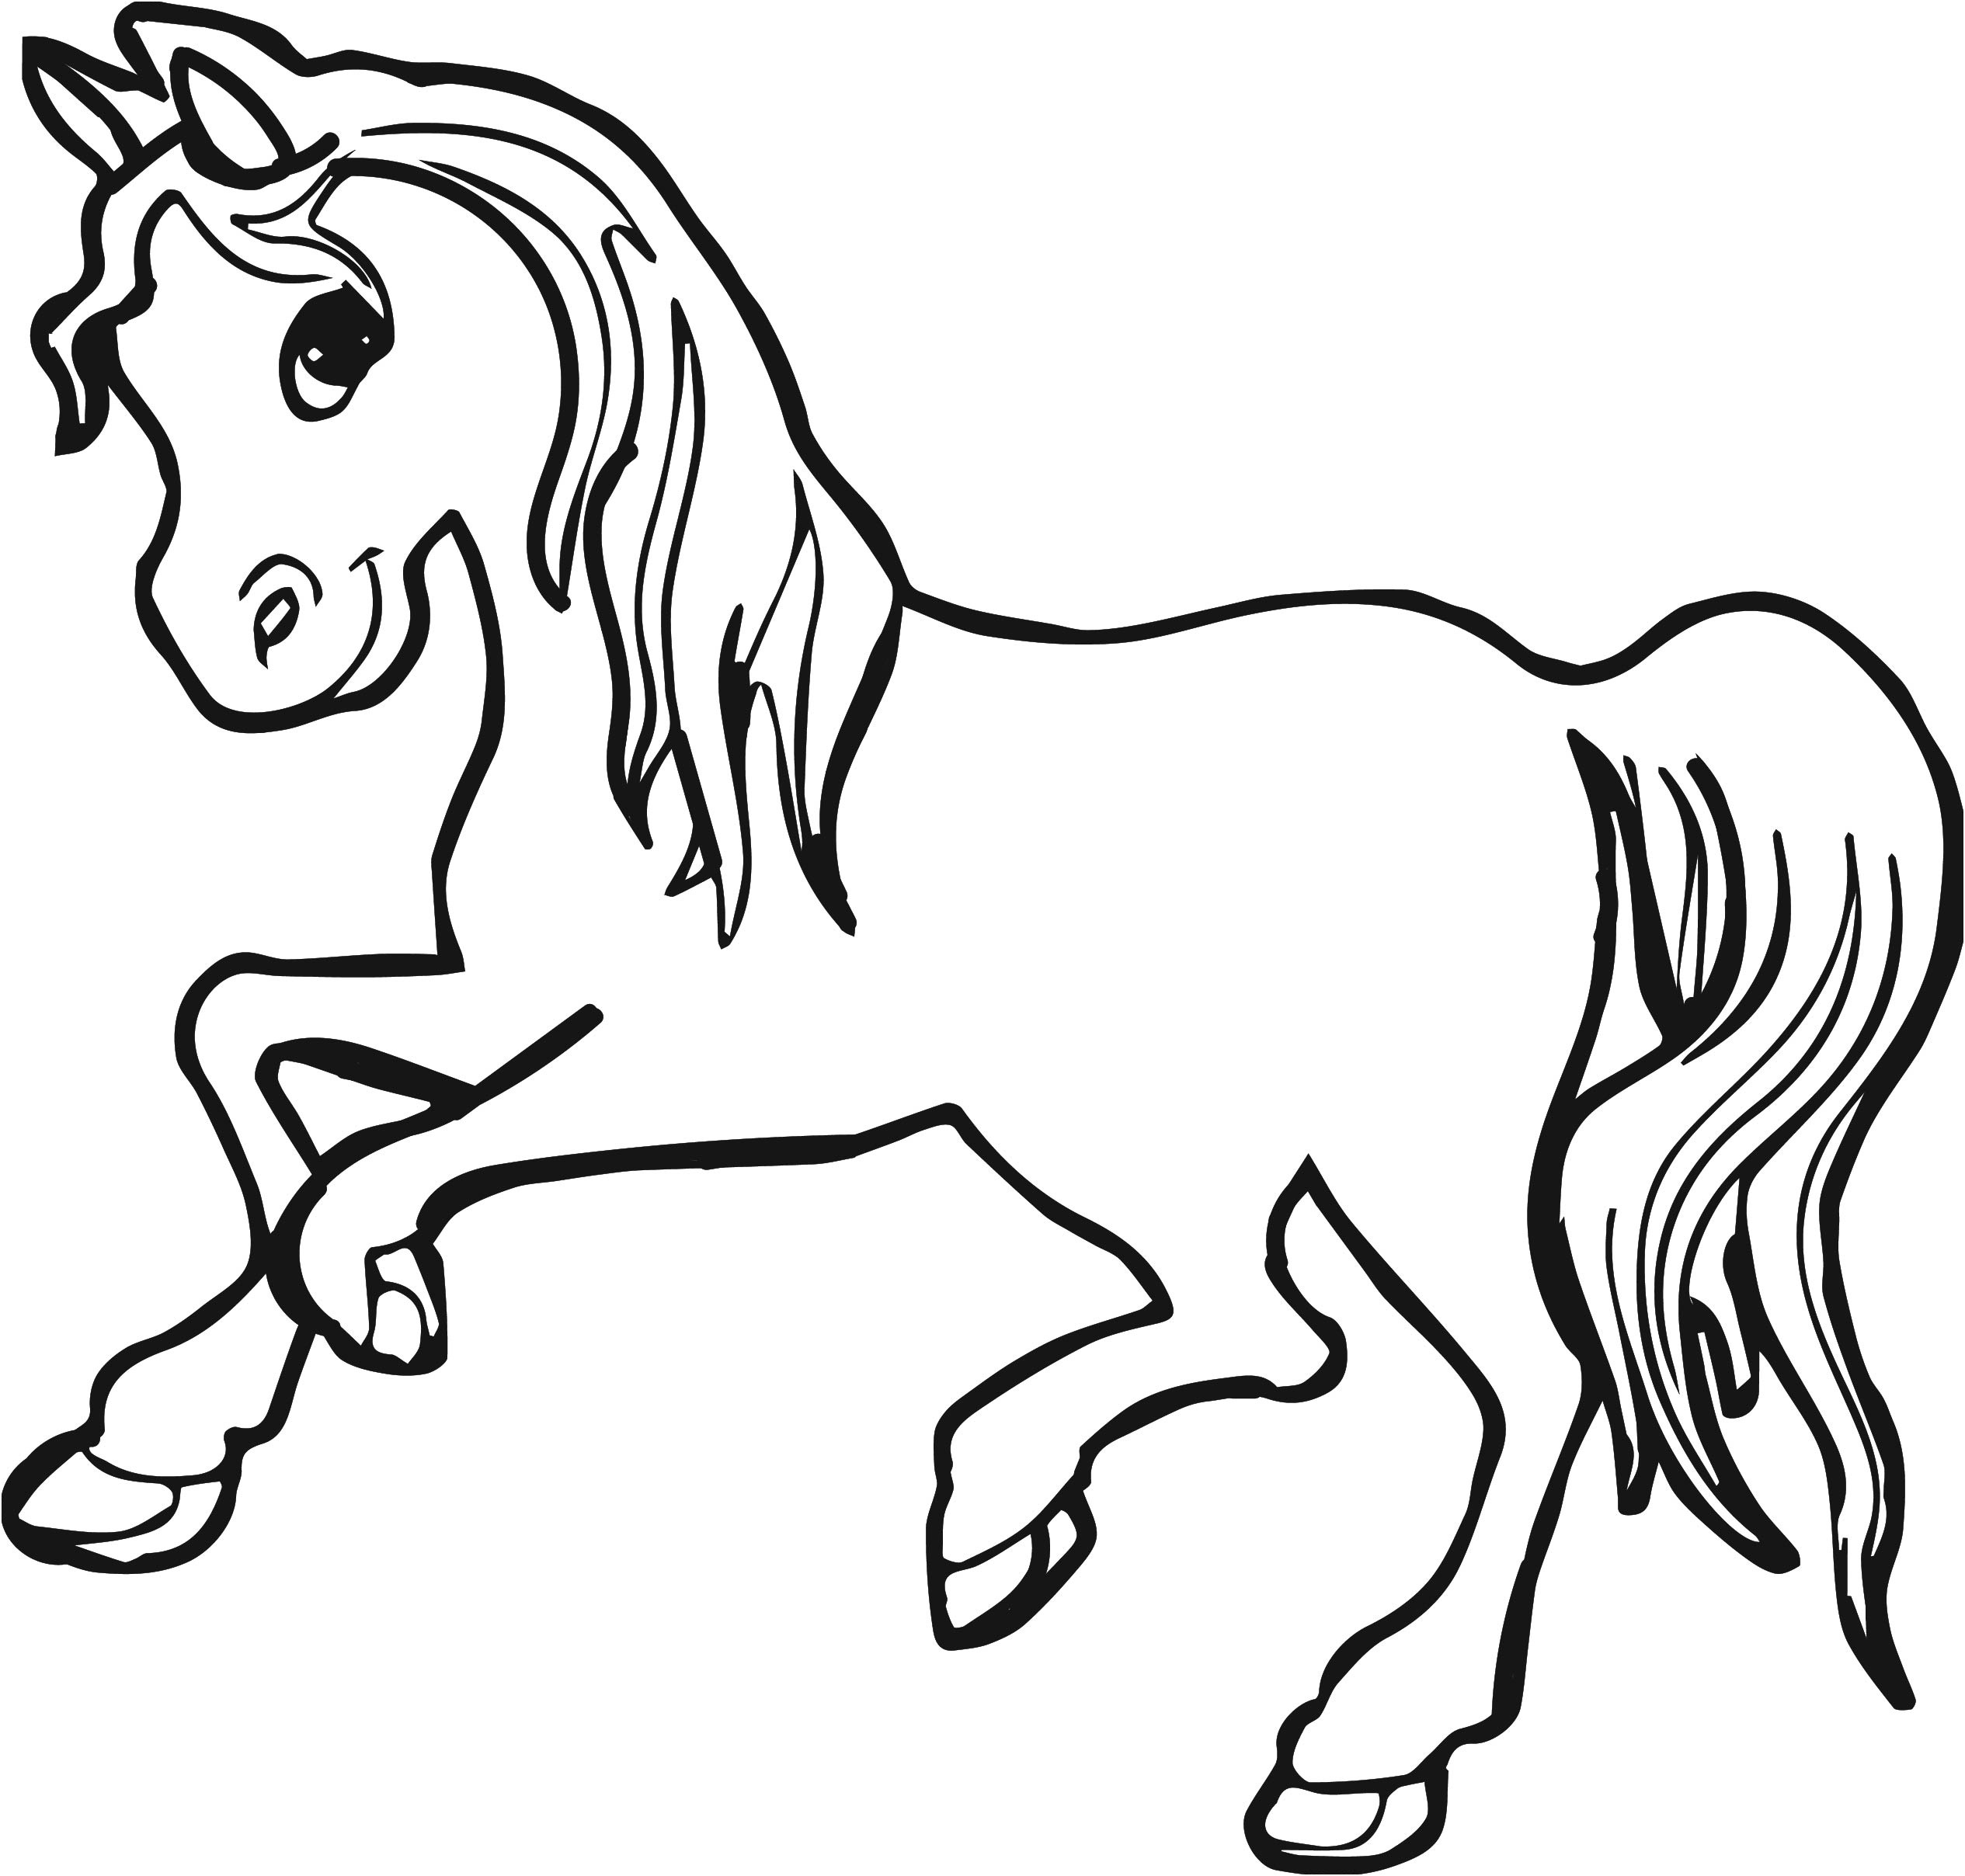 30 best horse coloring pages ideas